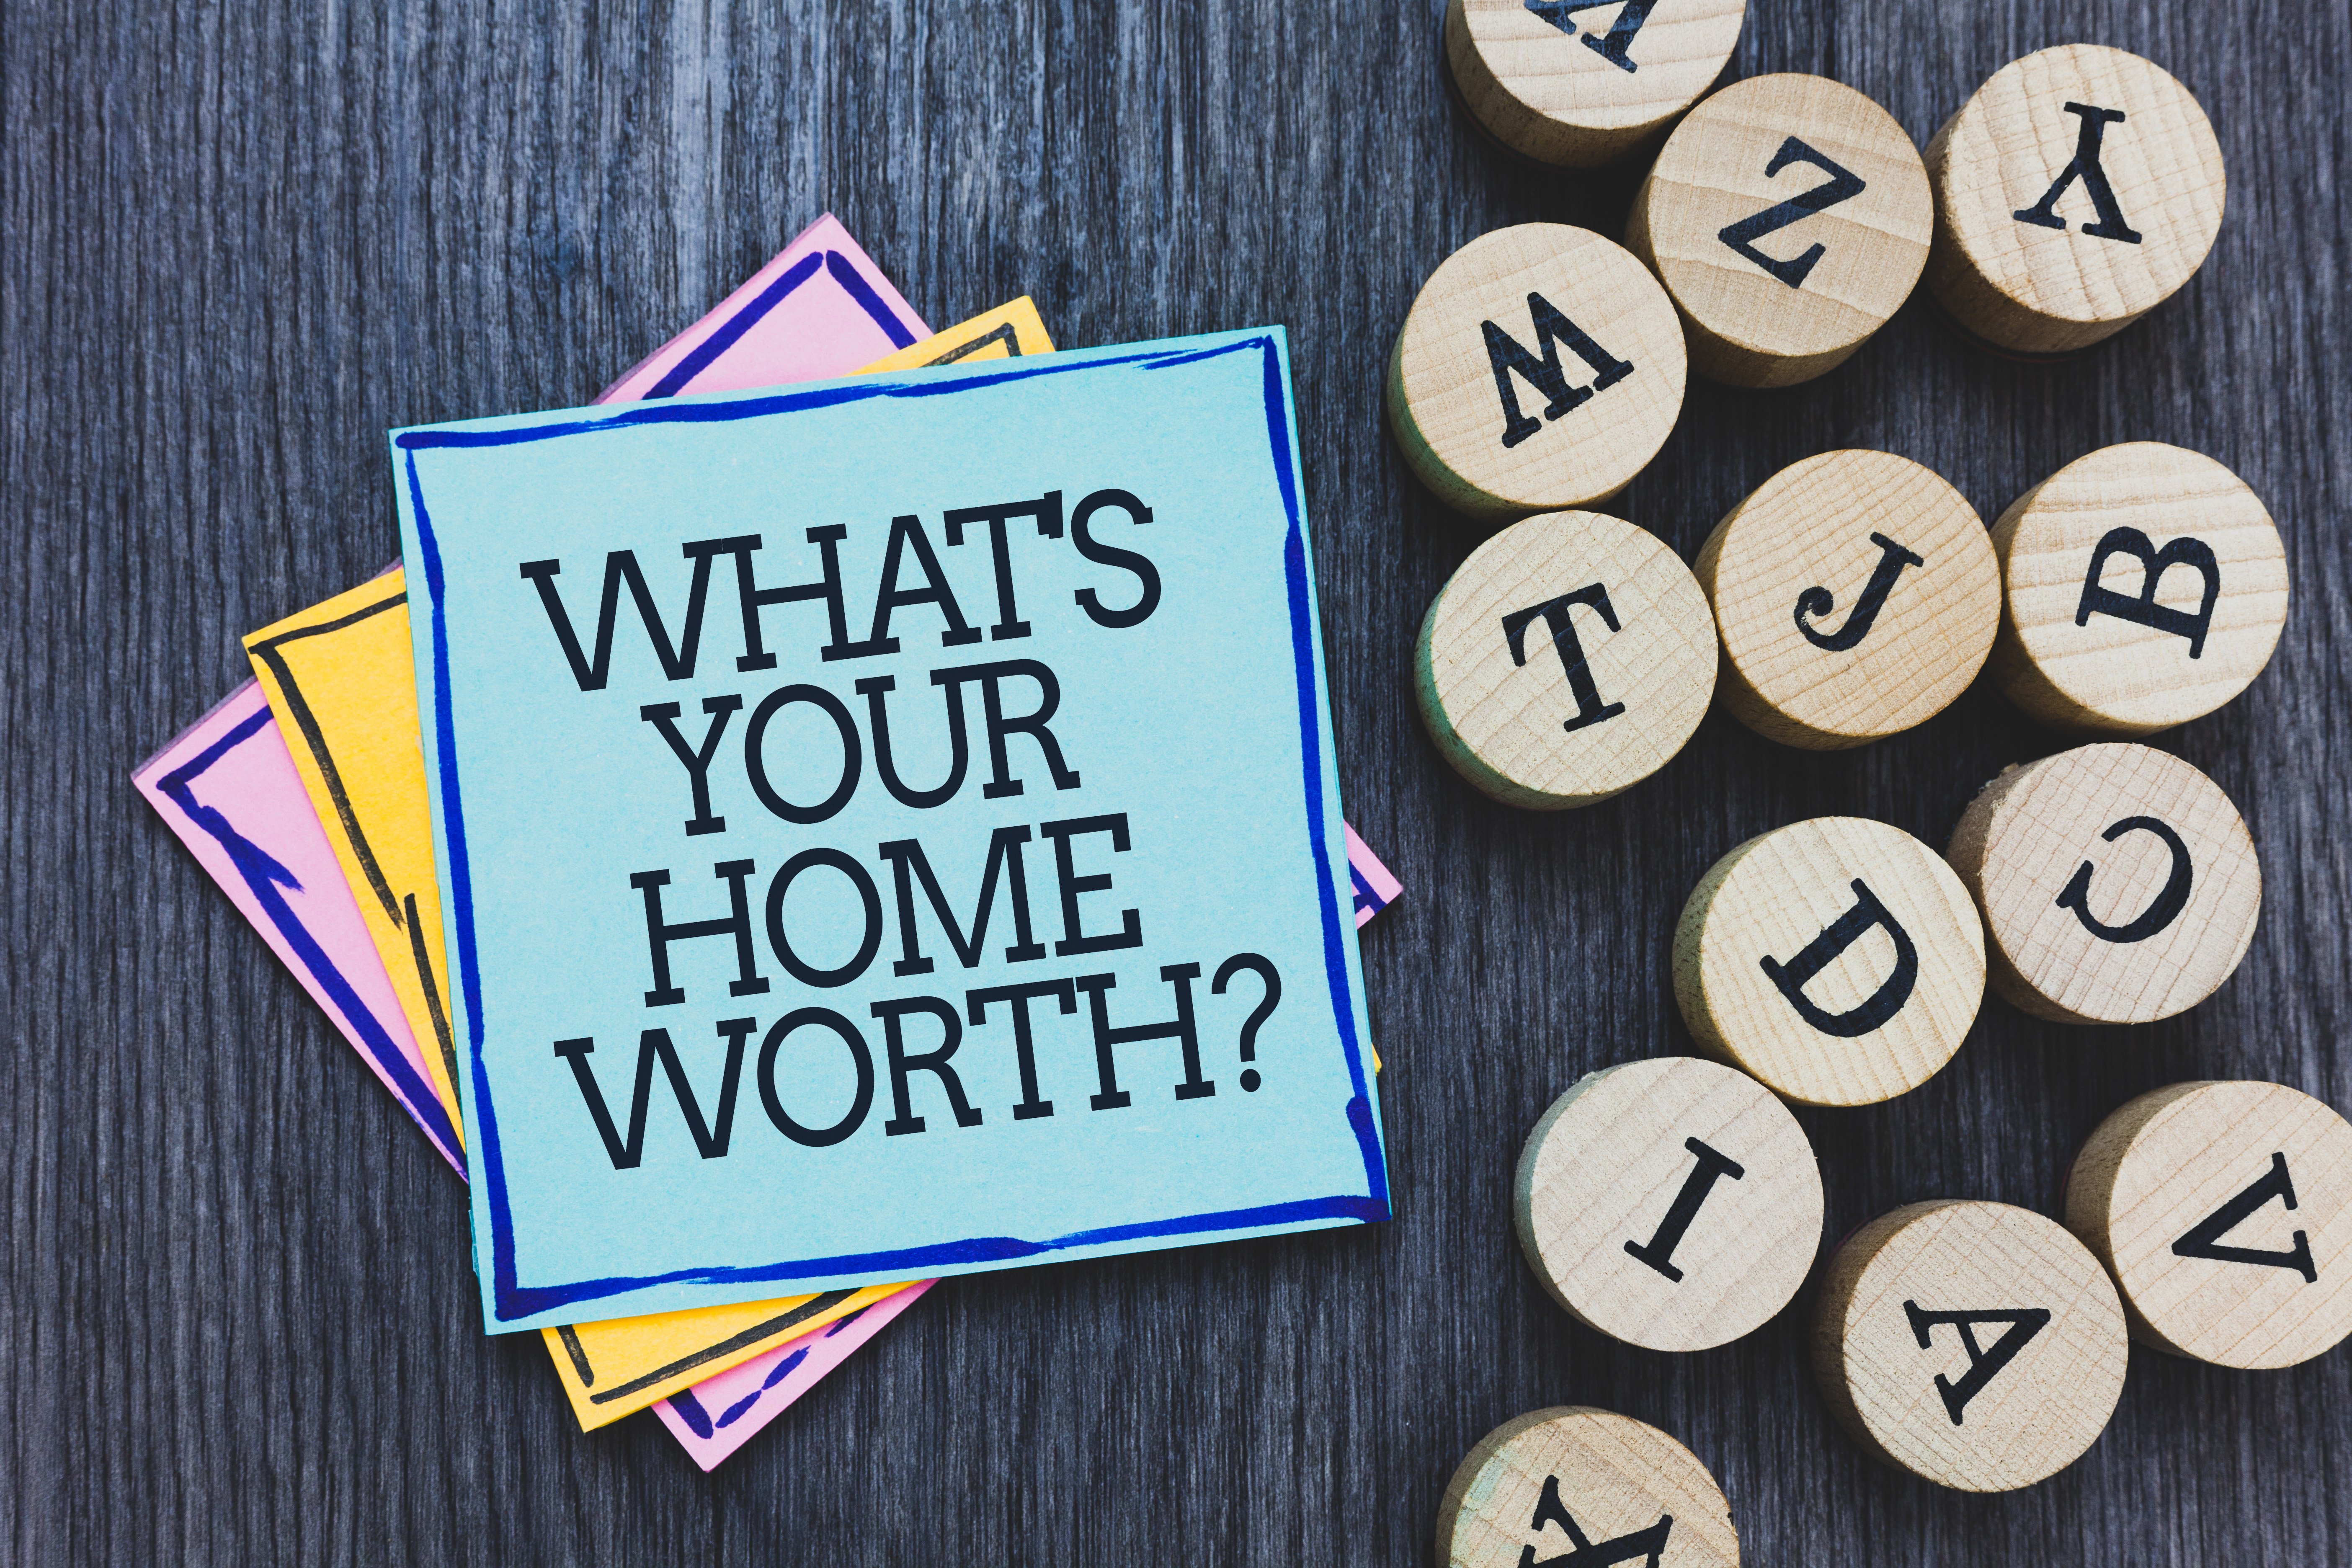 Pricing your home: What is your home worth?